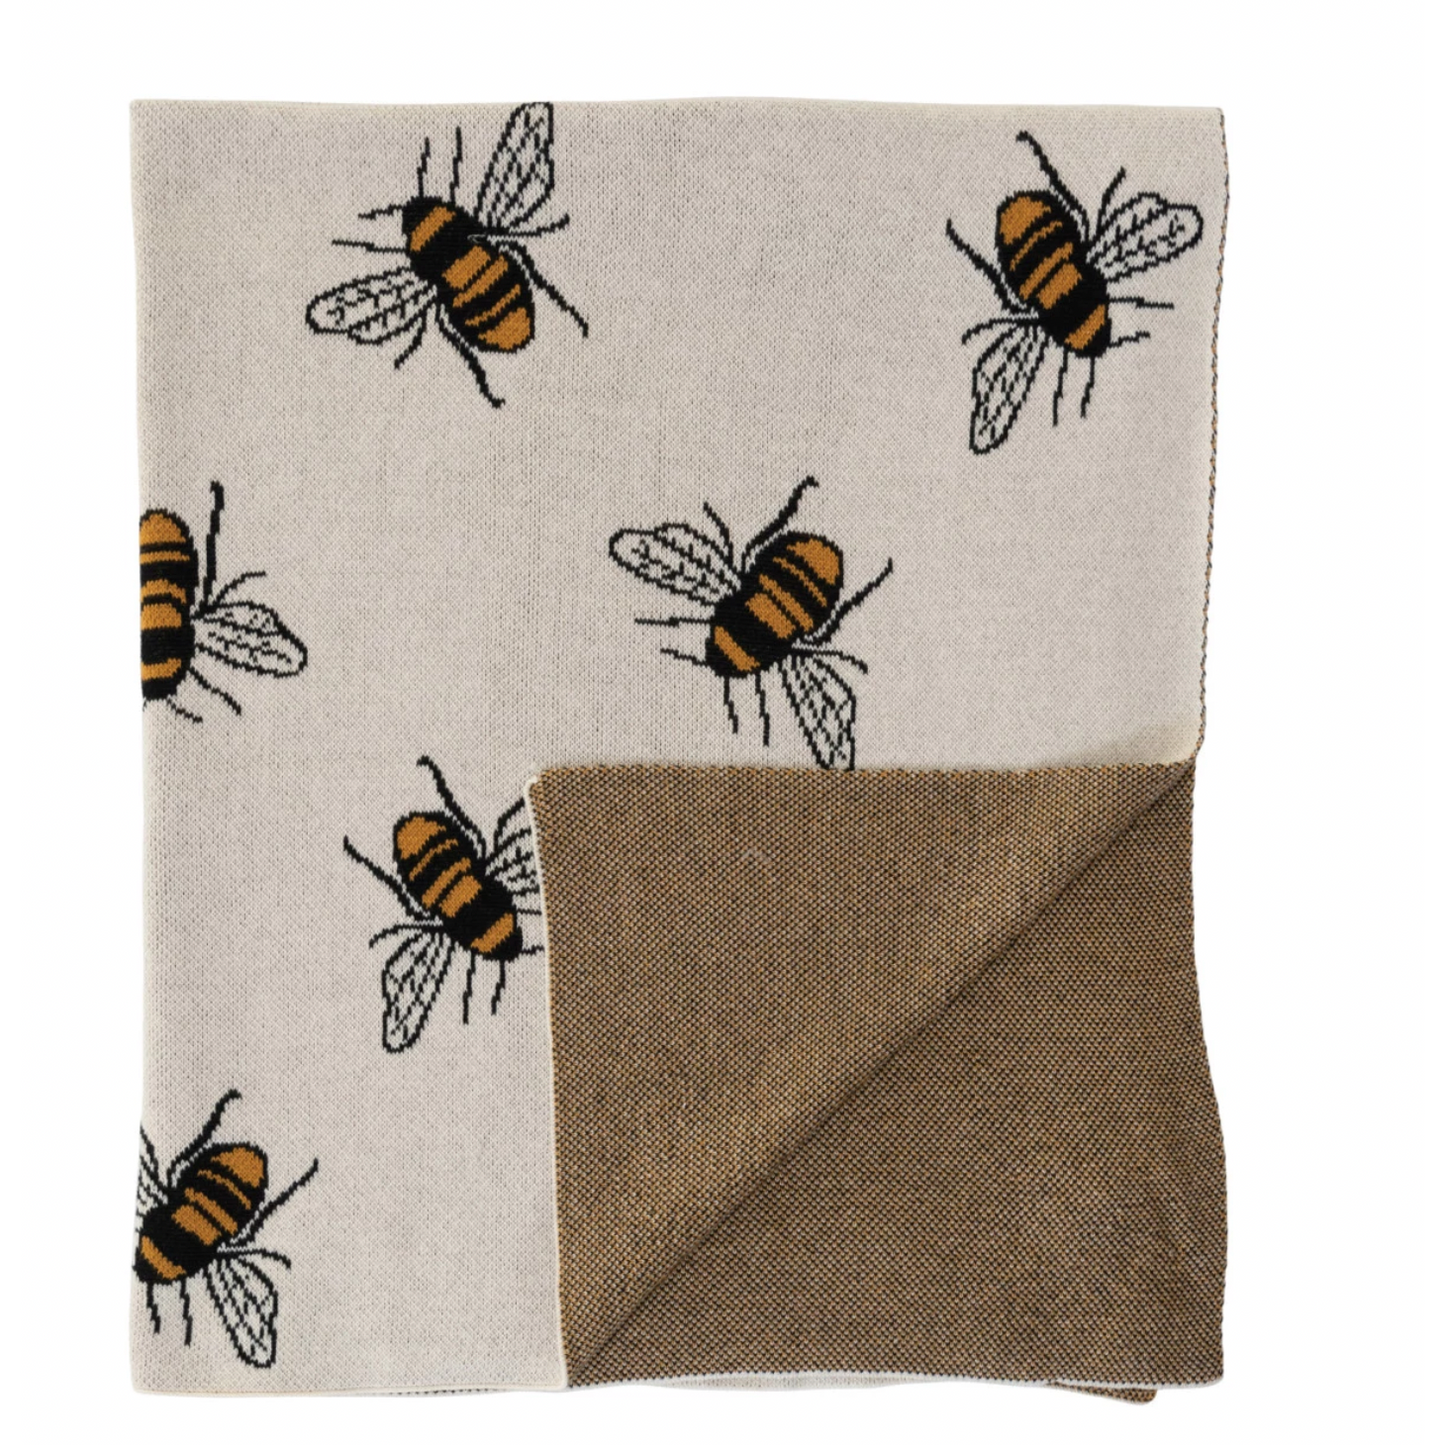 Cotton Knit Bee Blanket